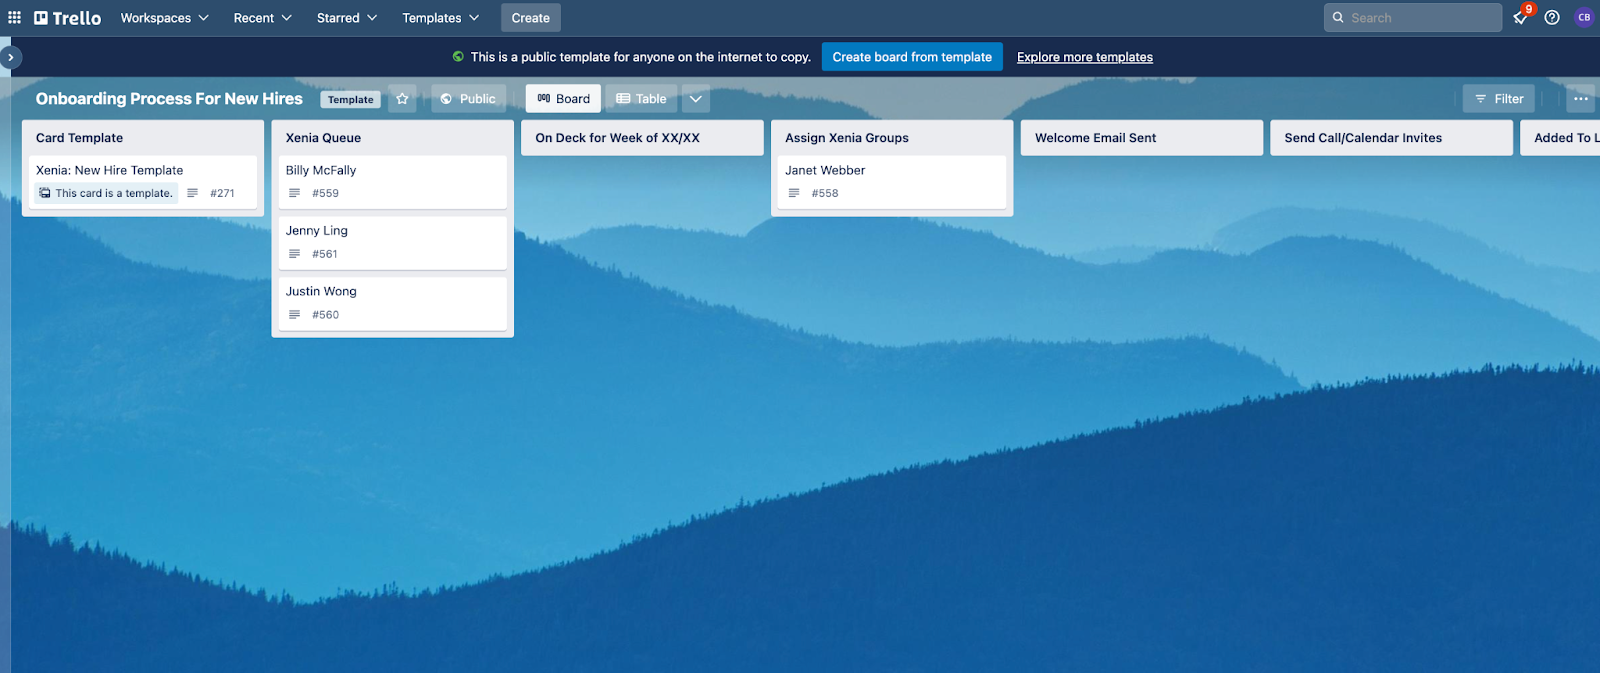 Trello's Onboarding Process For New Hires board template